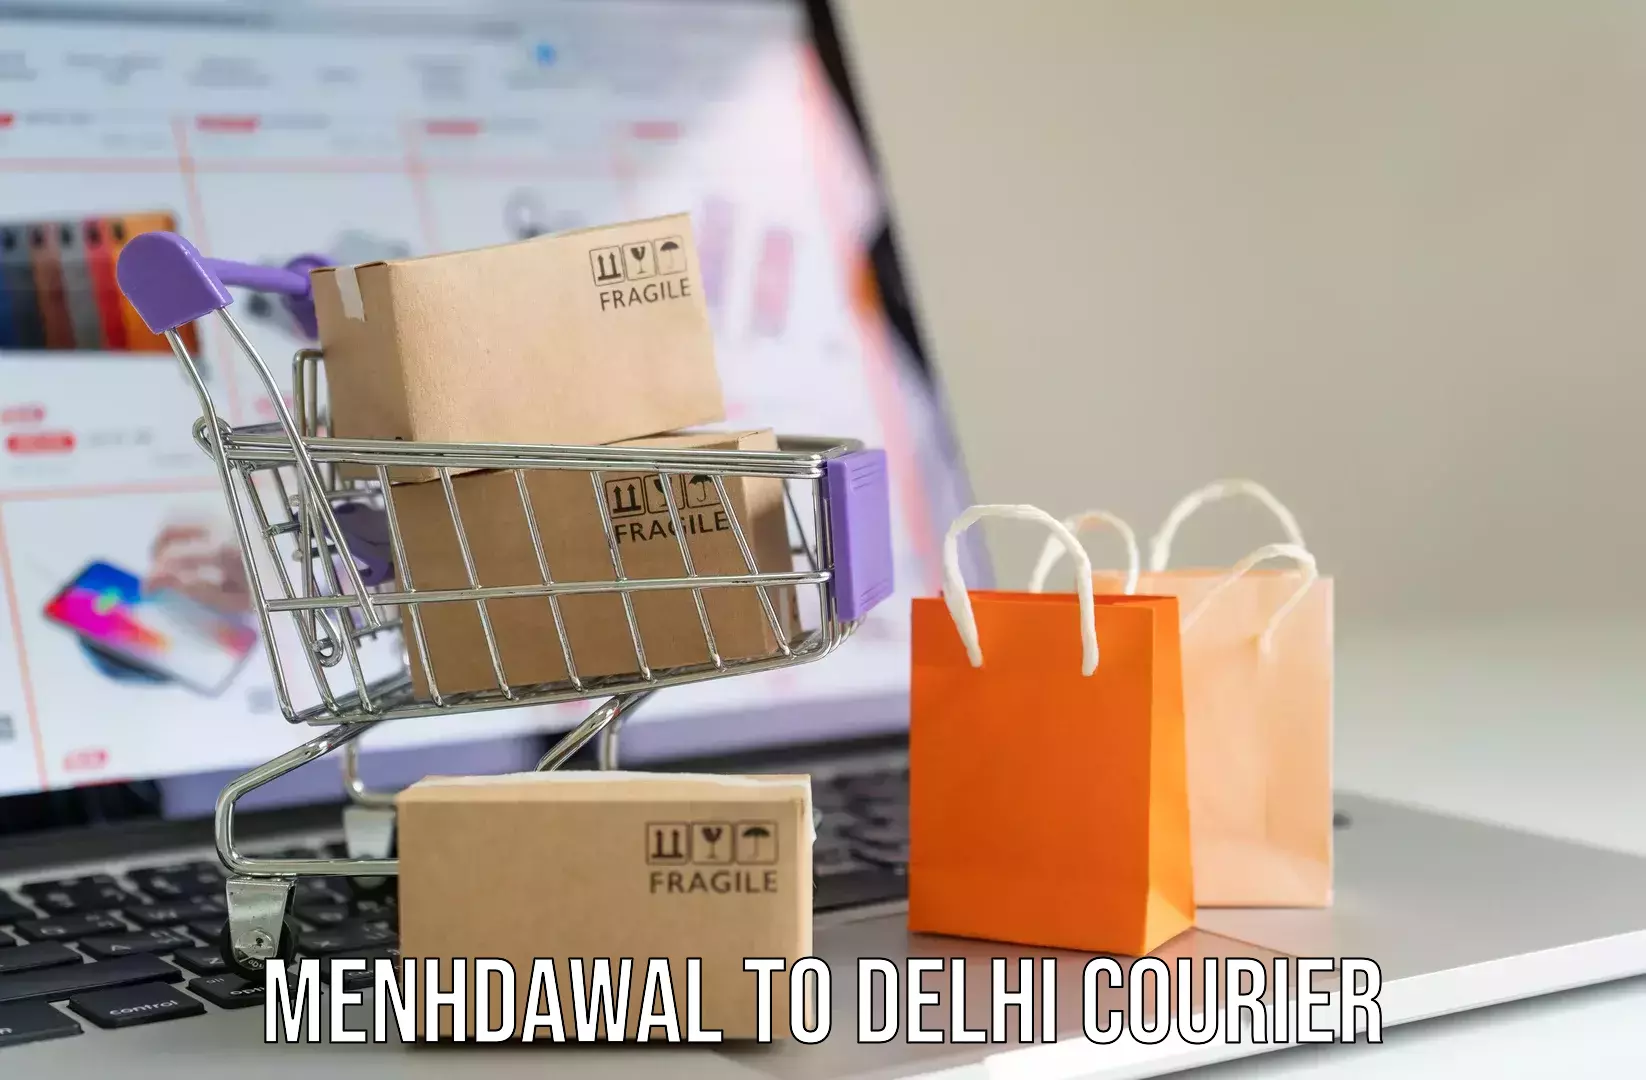 Baggage transport network Menhdawal to NCR